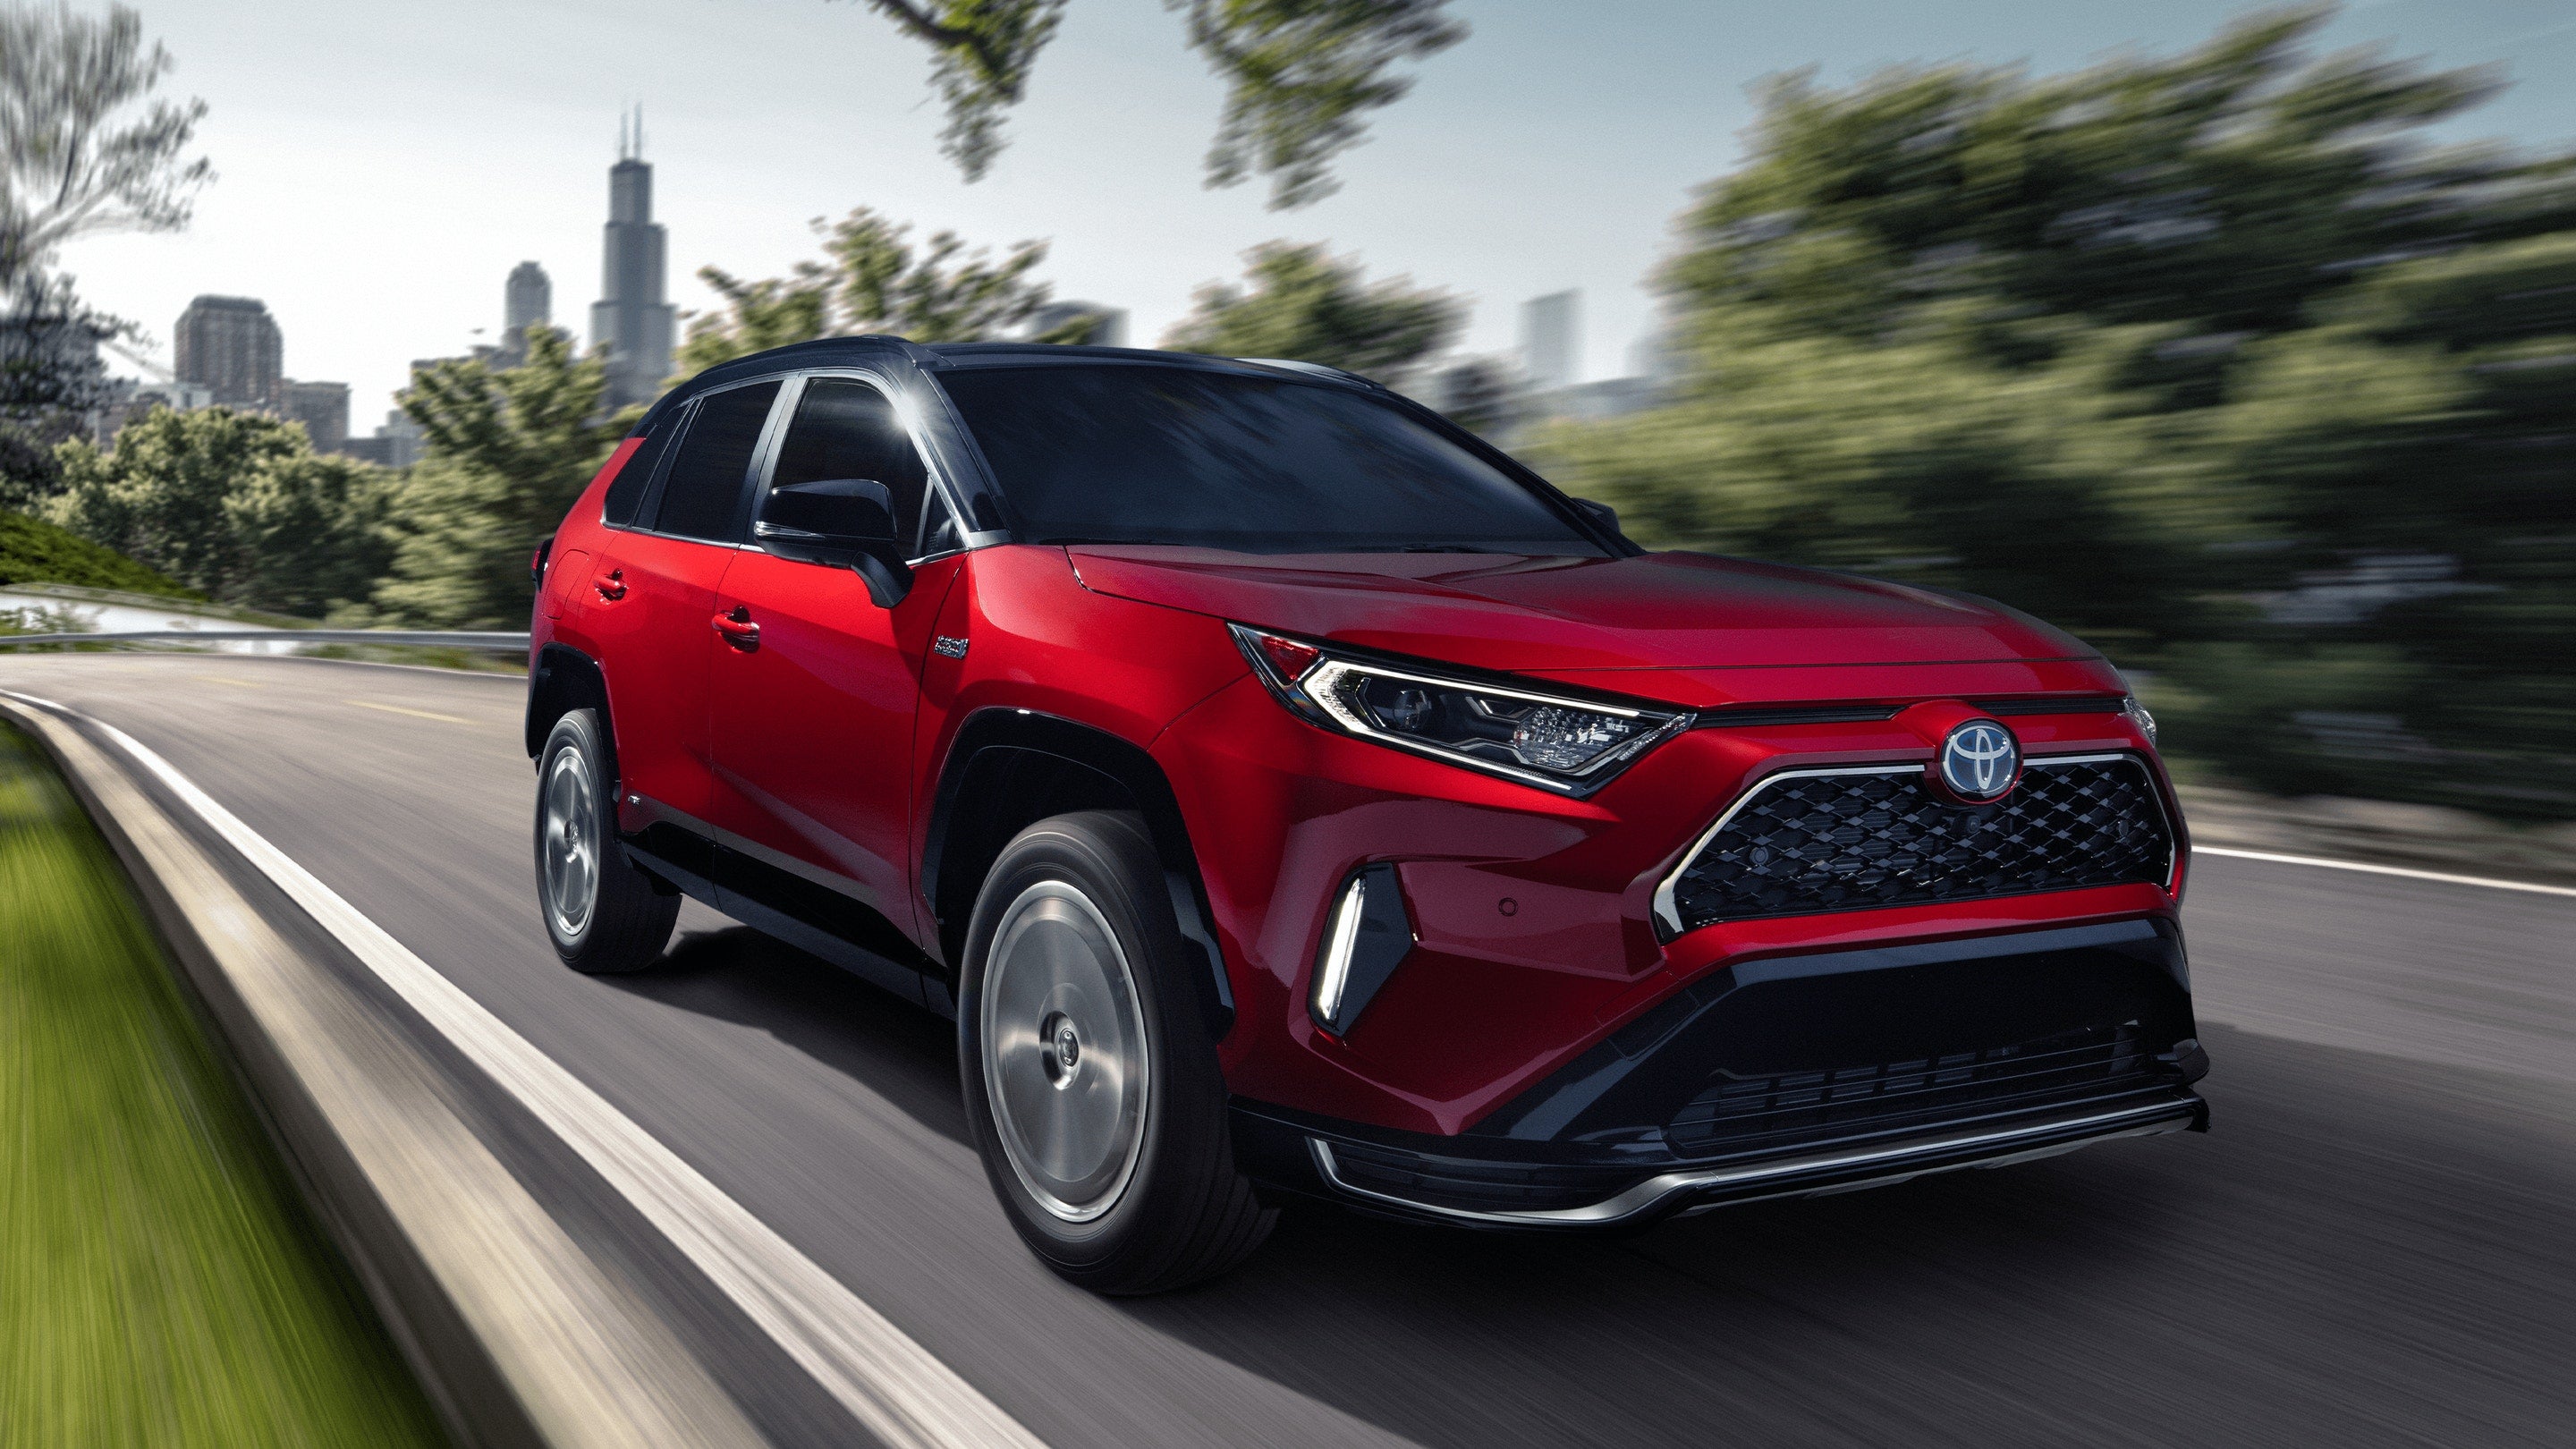 New 2021 Toyota RAV4 Prime - Coming to Falmouth Toyota of Bourne, MA - Cape Cod